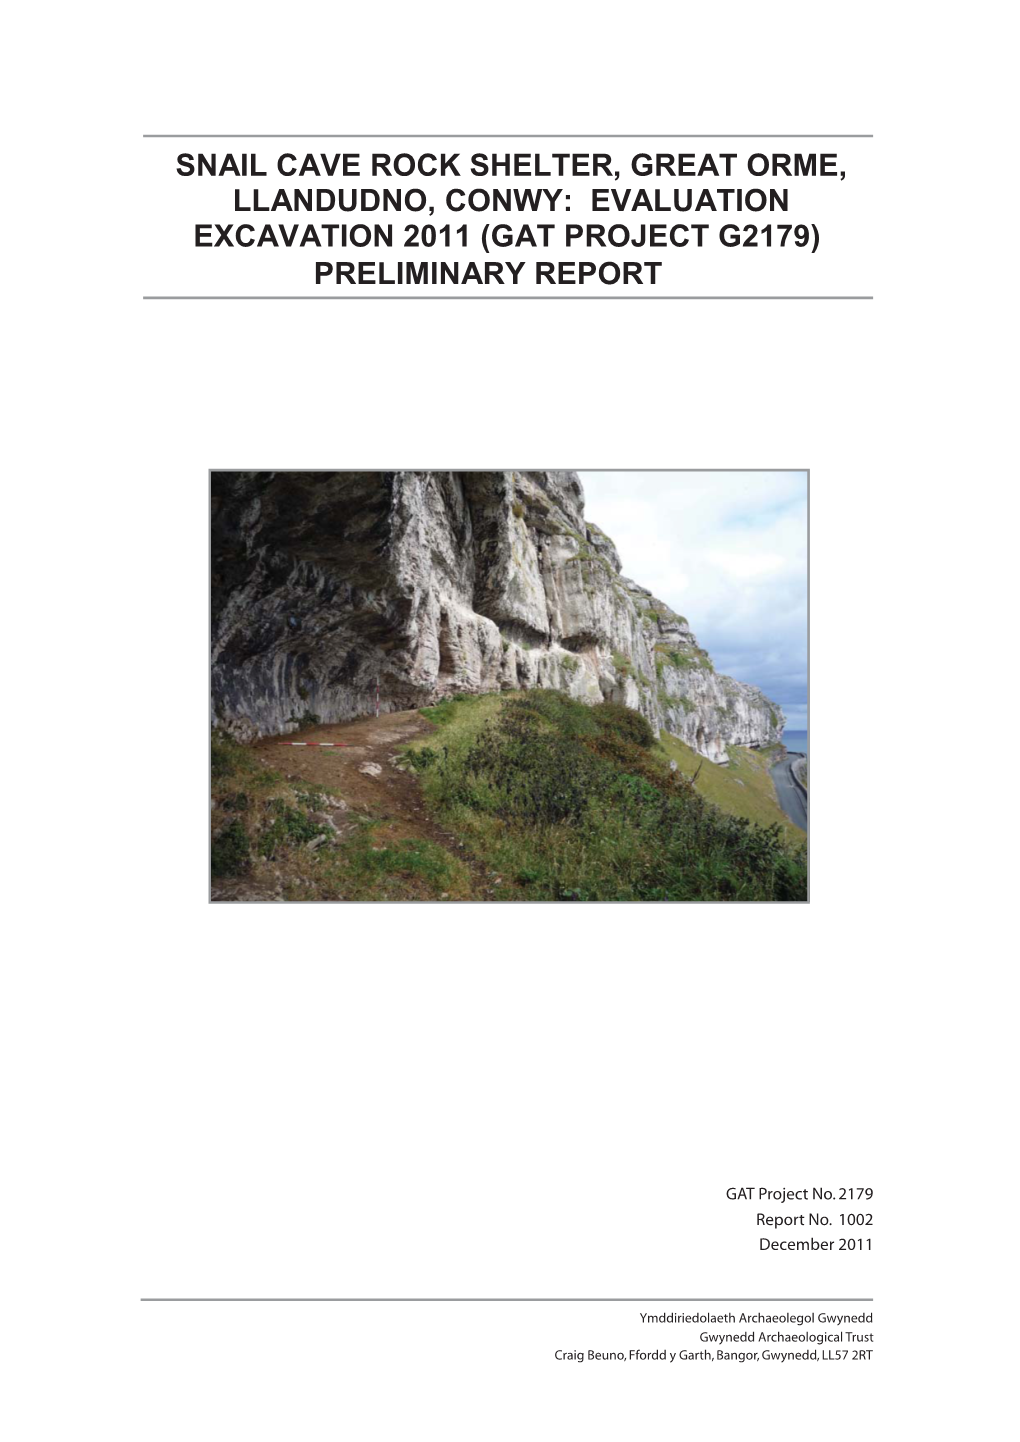 Snail Cave Rock Shelter, Great Orme, Llandudno, Conwy: Evaluation Excavation 2011 (Gat Project G2179) Preliminary� Report 